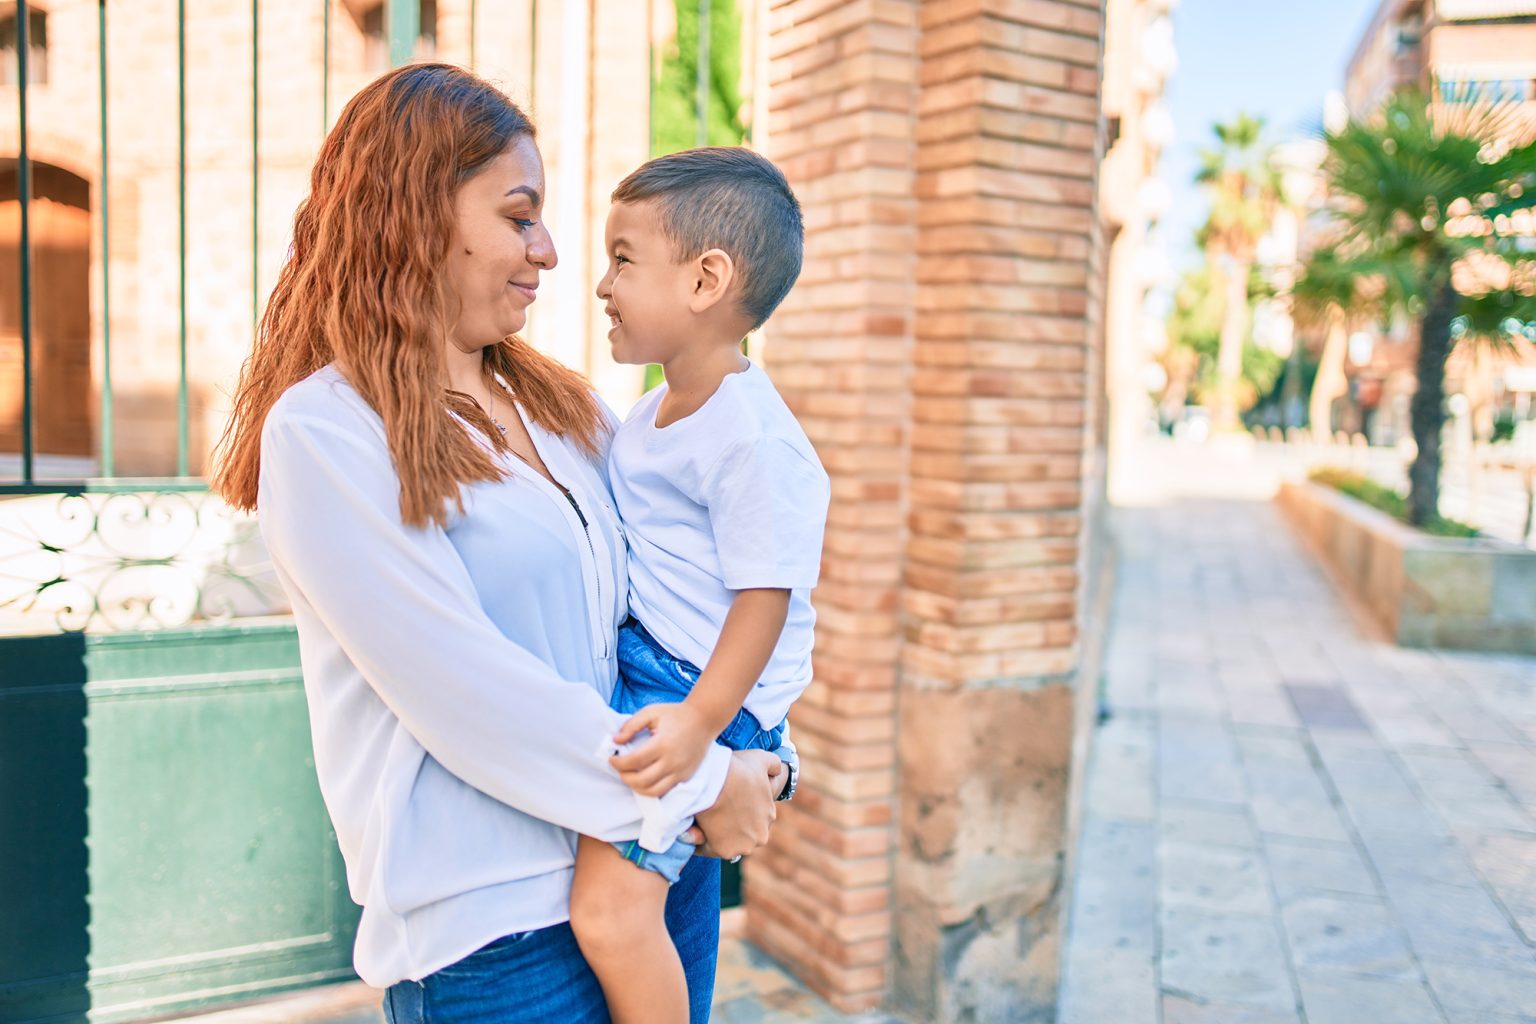 Adorable latin mother and son smiling on a city sidewalk